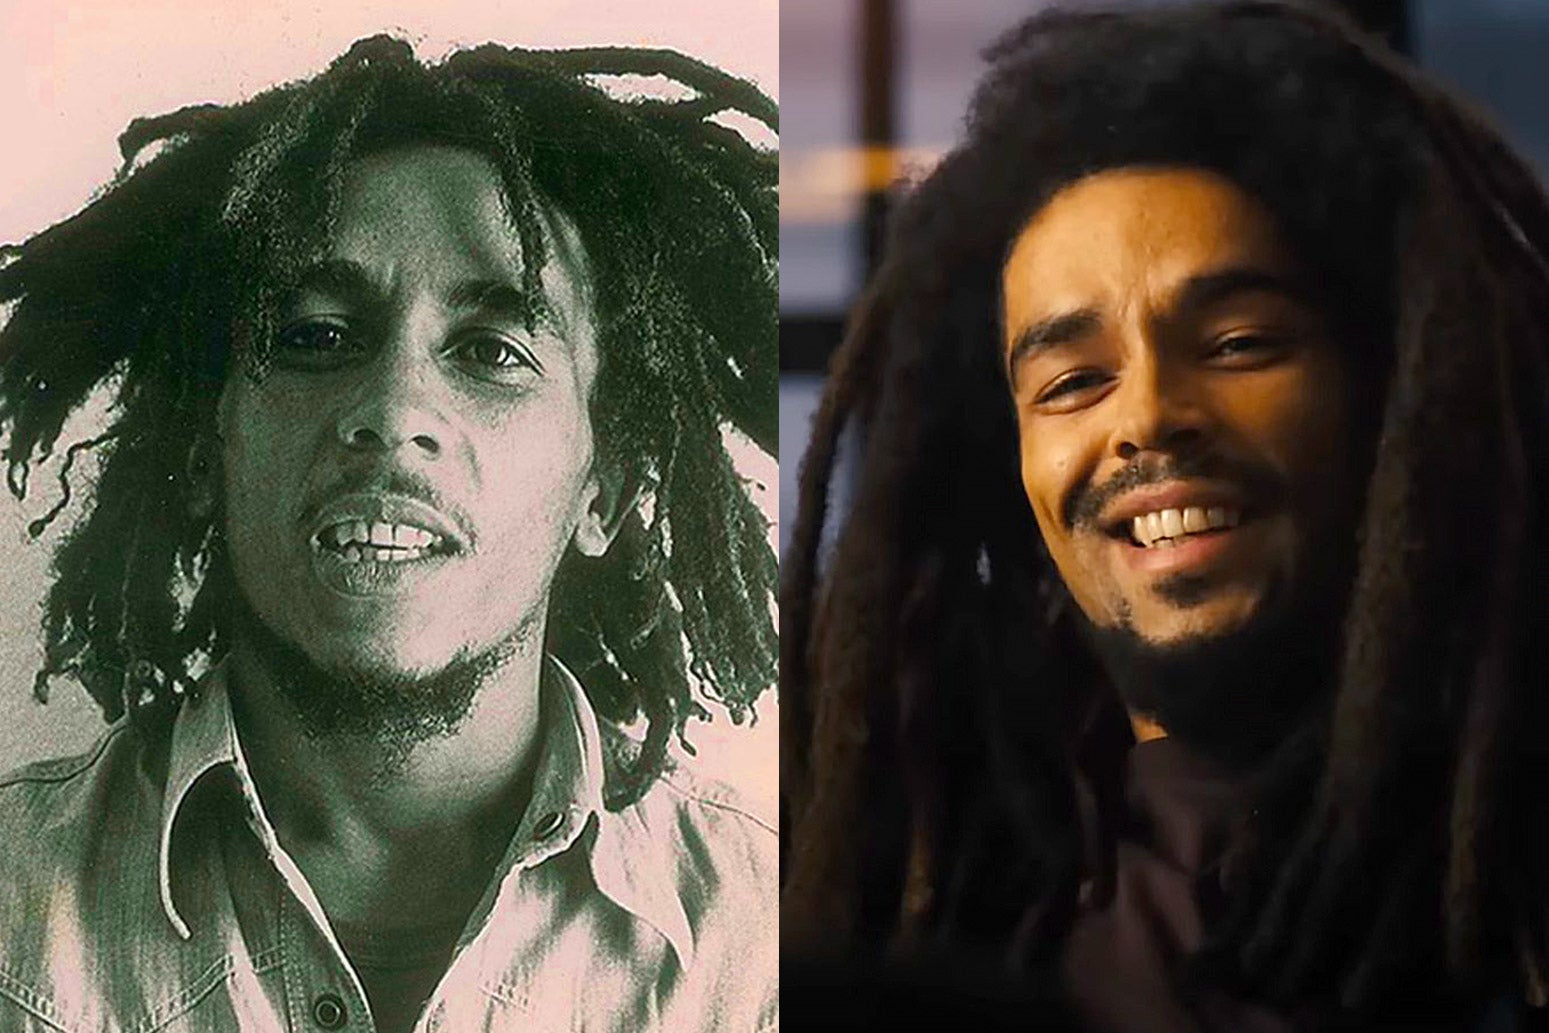 Bob Marley from 1976, next to a photo of Bob Marley being portrayed by Kingsley Ben-Adir in the One Love film.